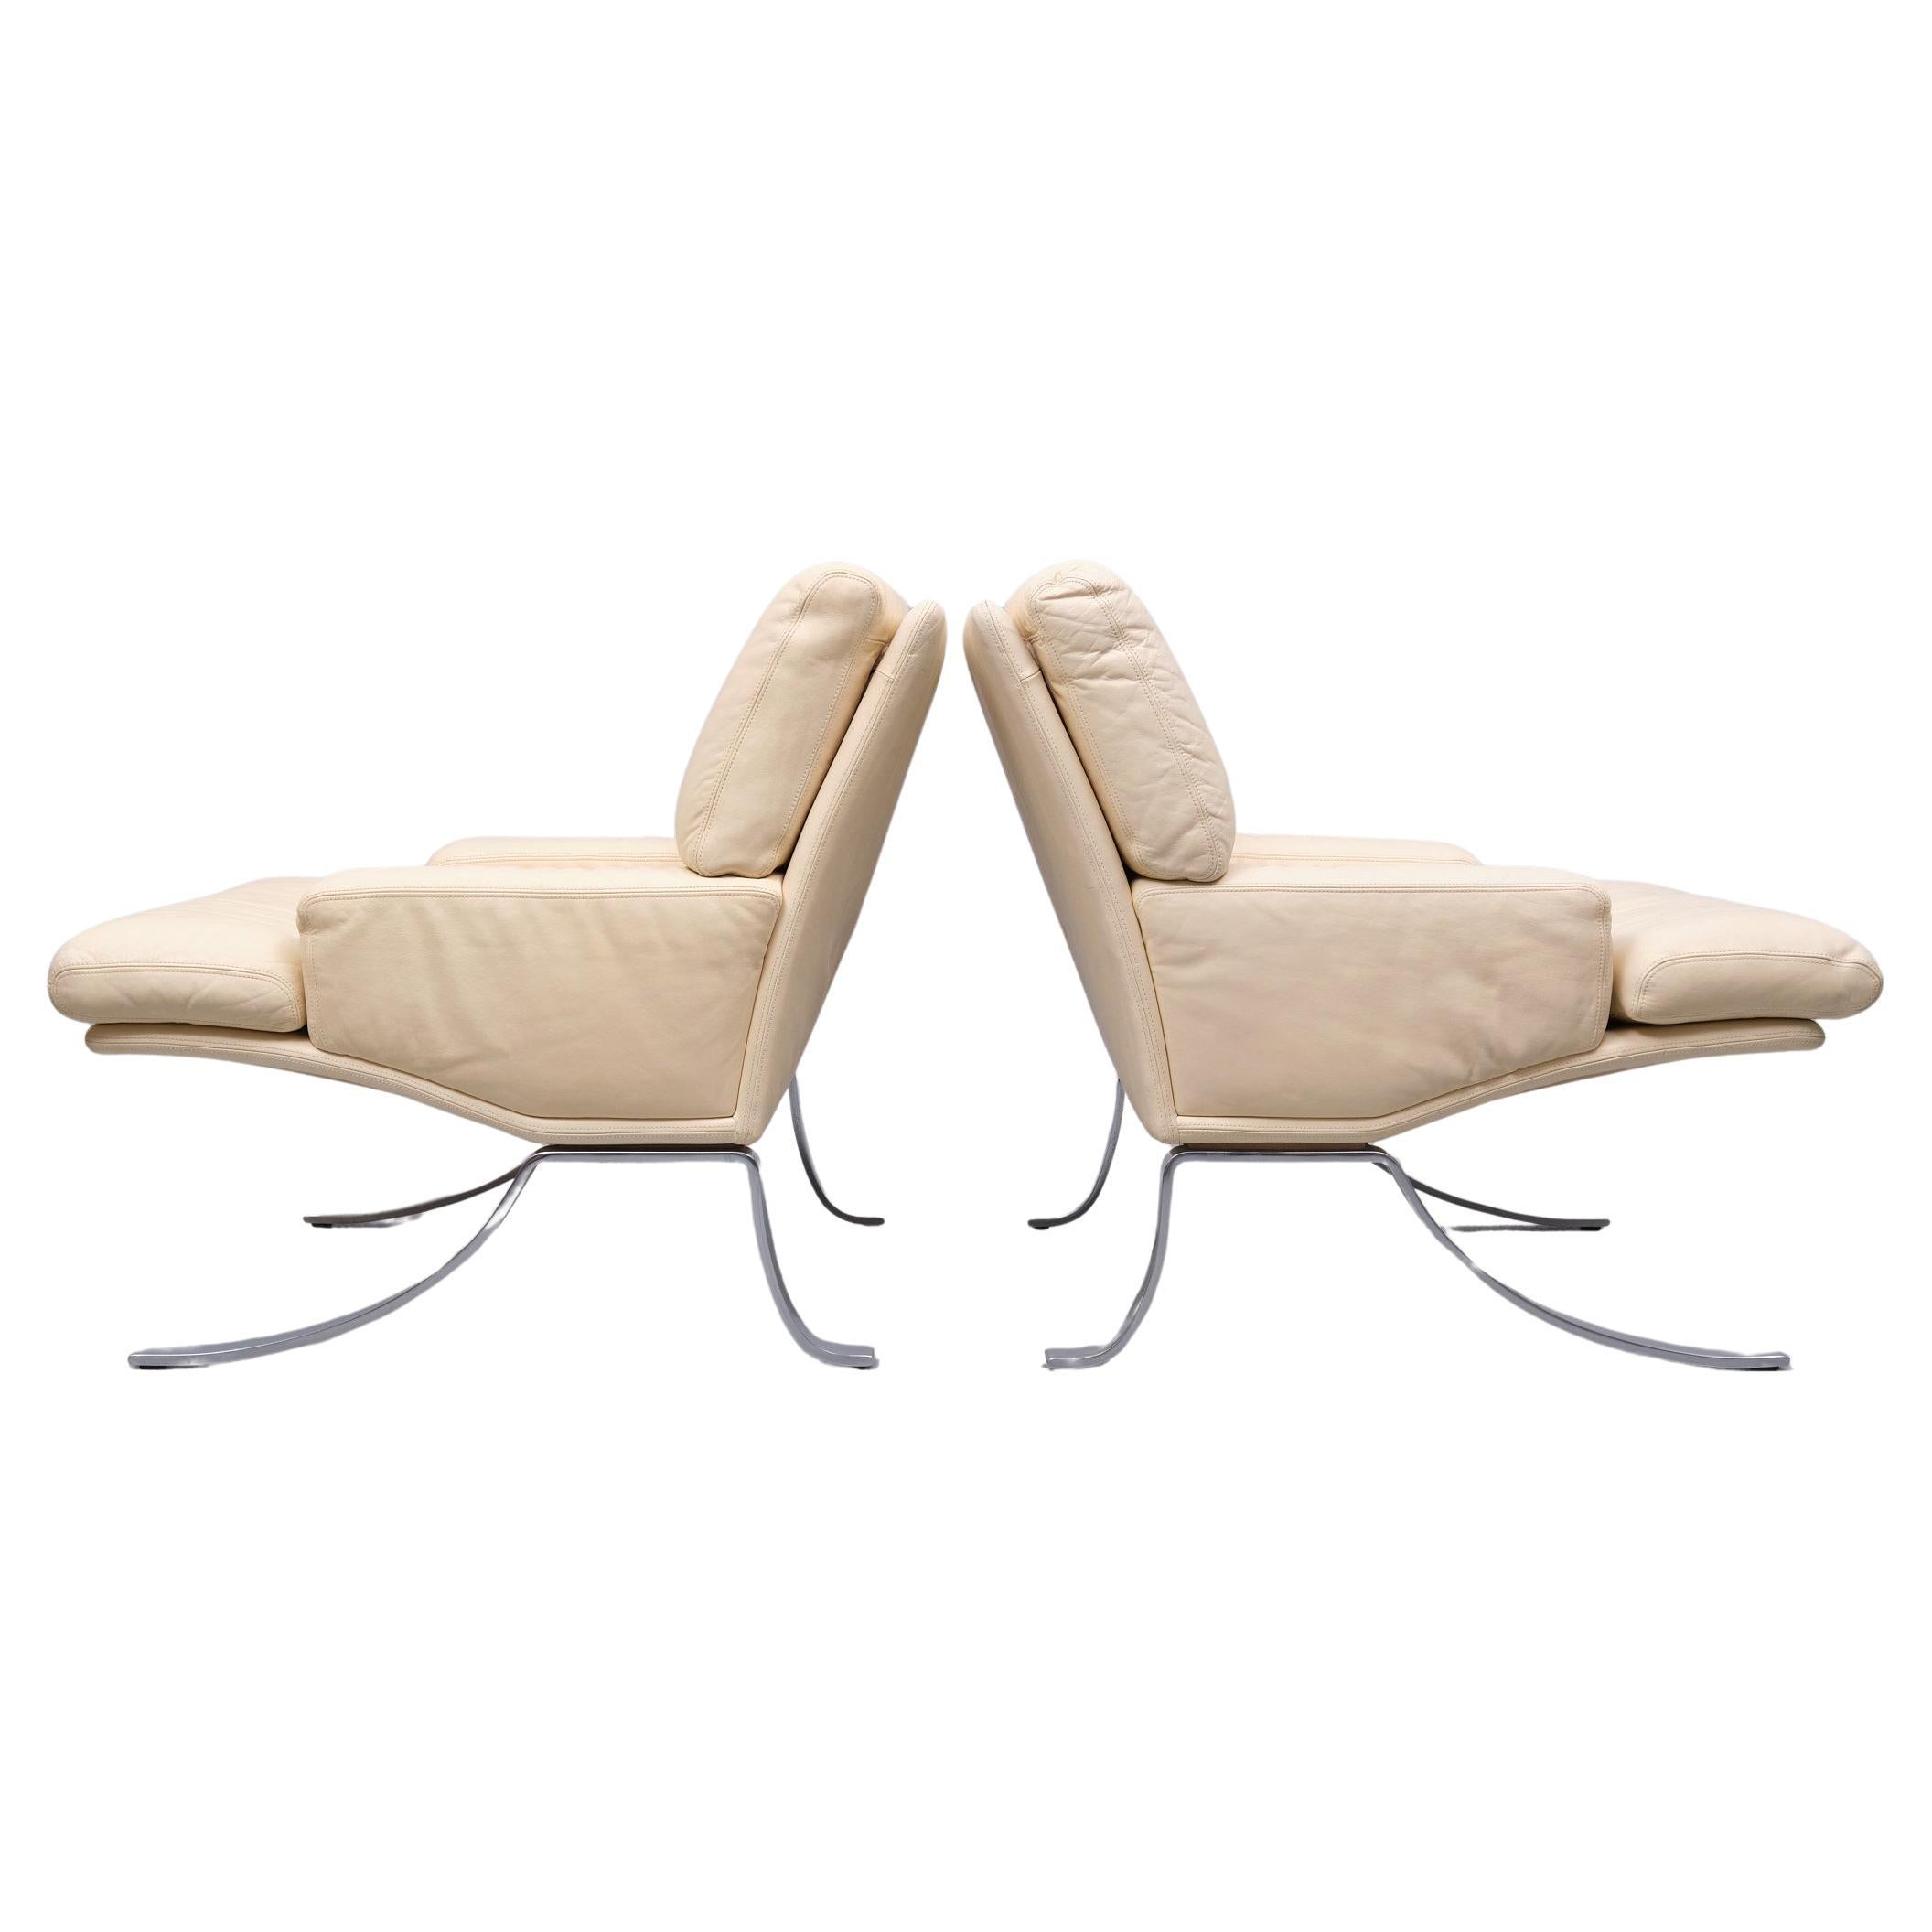 Superb set of Lounge Chairs and ottoman . Manufactured by Durlet Belgium 1970s 
Ivory color Leather ,on a Chrome on Steel base . Very good seating comfort .
Super rare . Looks like something from the Thunderbird's . so stylish . 
Heavy in weight .  